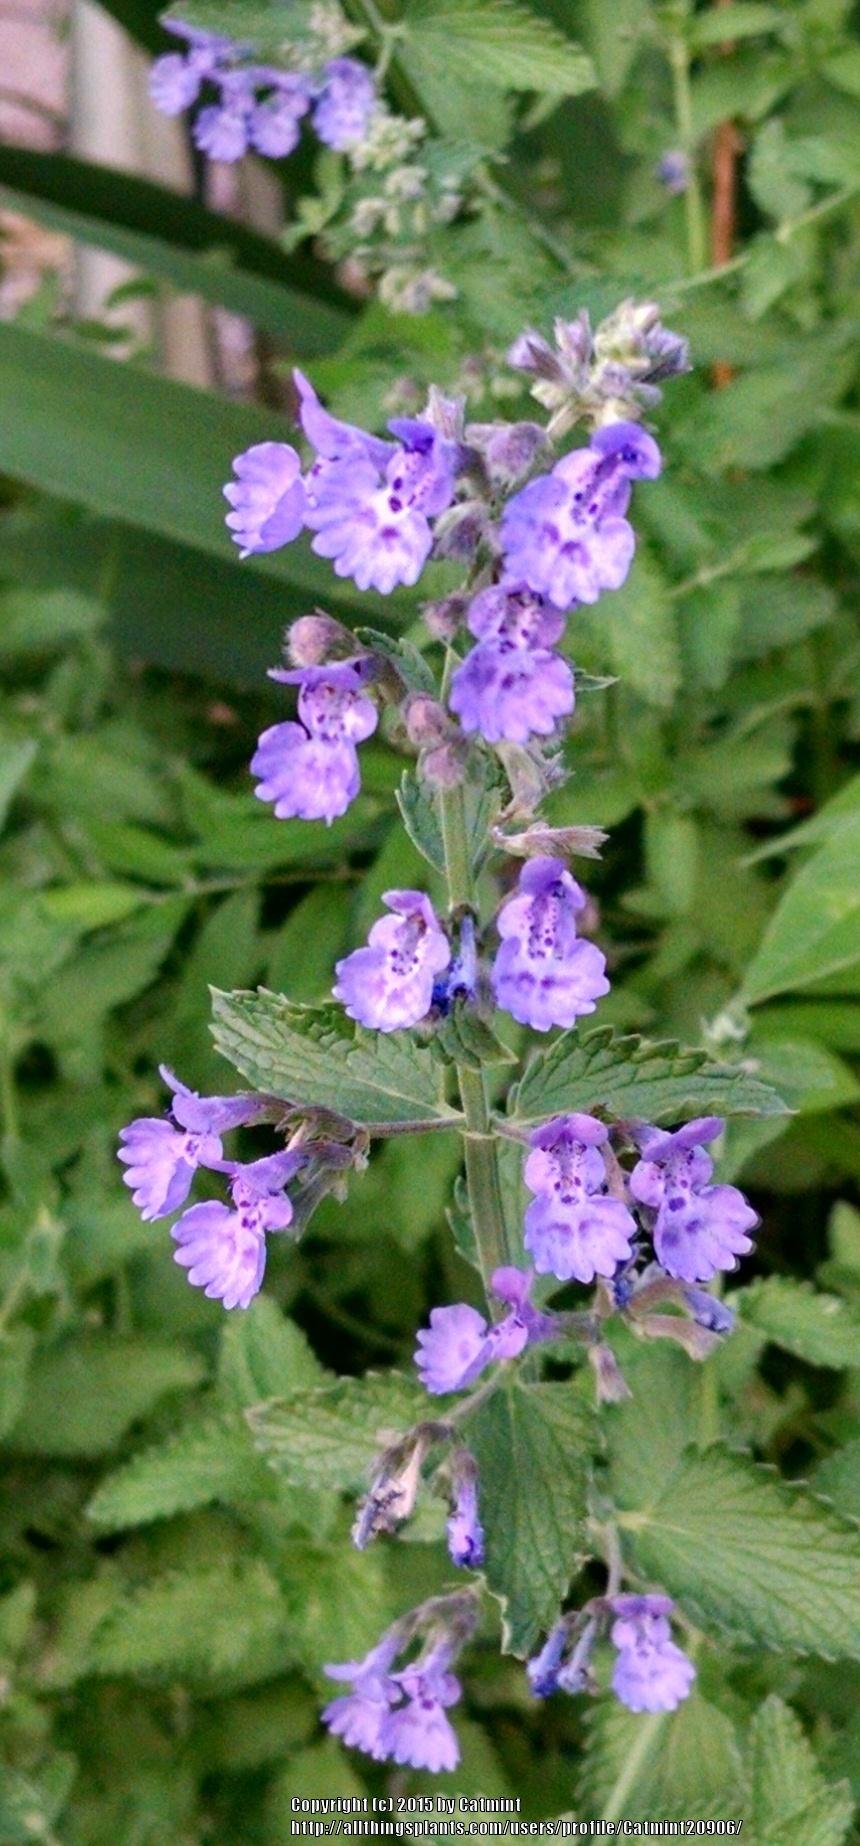 Photo of Catmint (Nepeta x faassenii 'Walker's Low') uploaded by Catmint20906